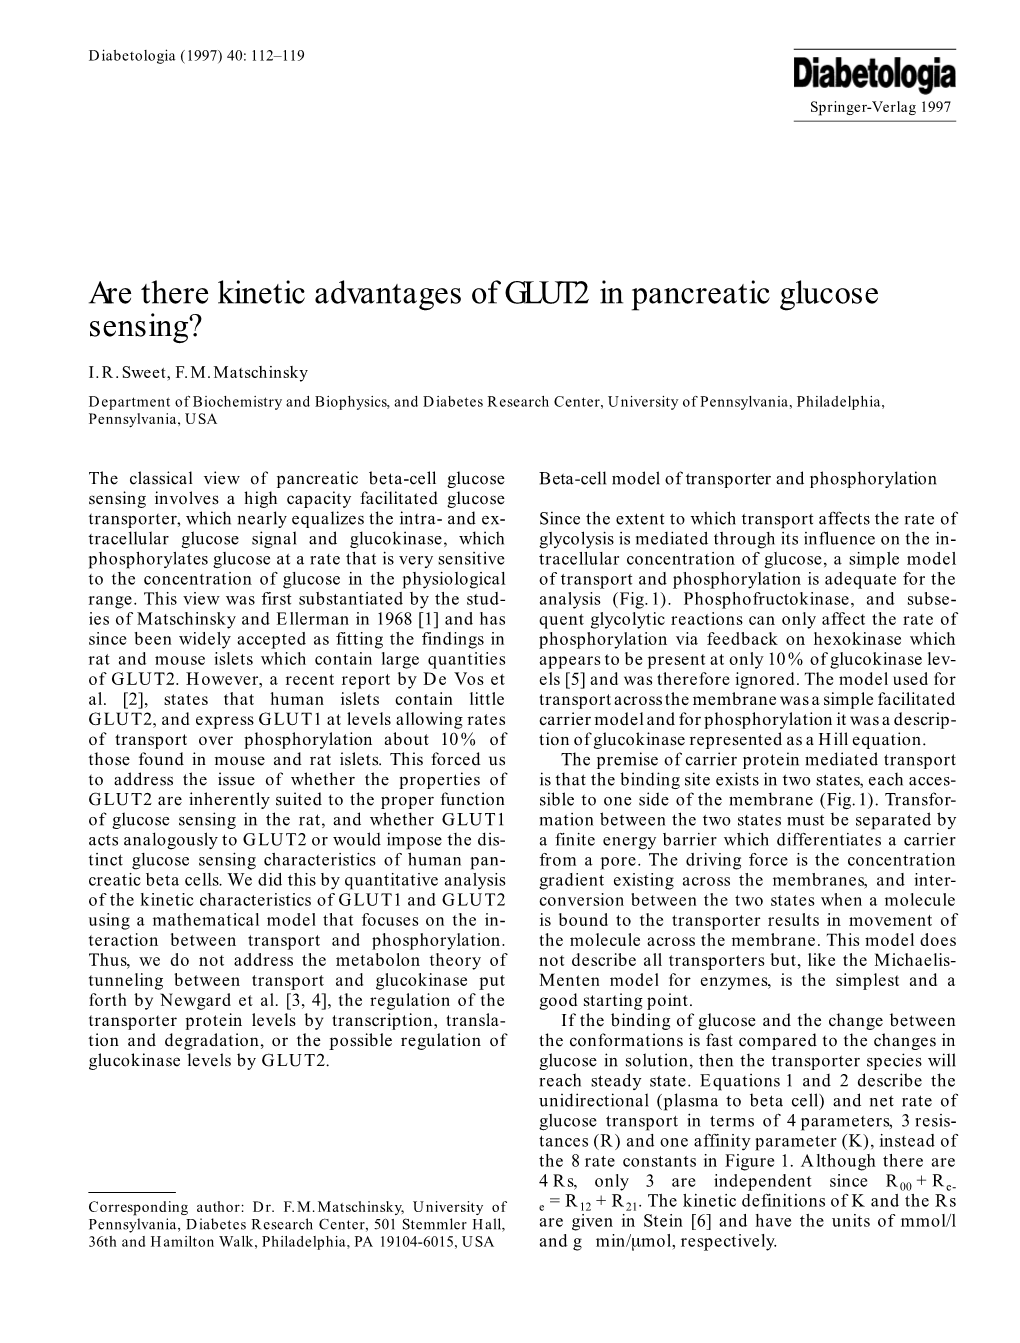 Are There Kinetic Advantages of GLUT2 in Pancreatic Glucose Sensing?